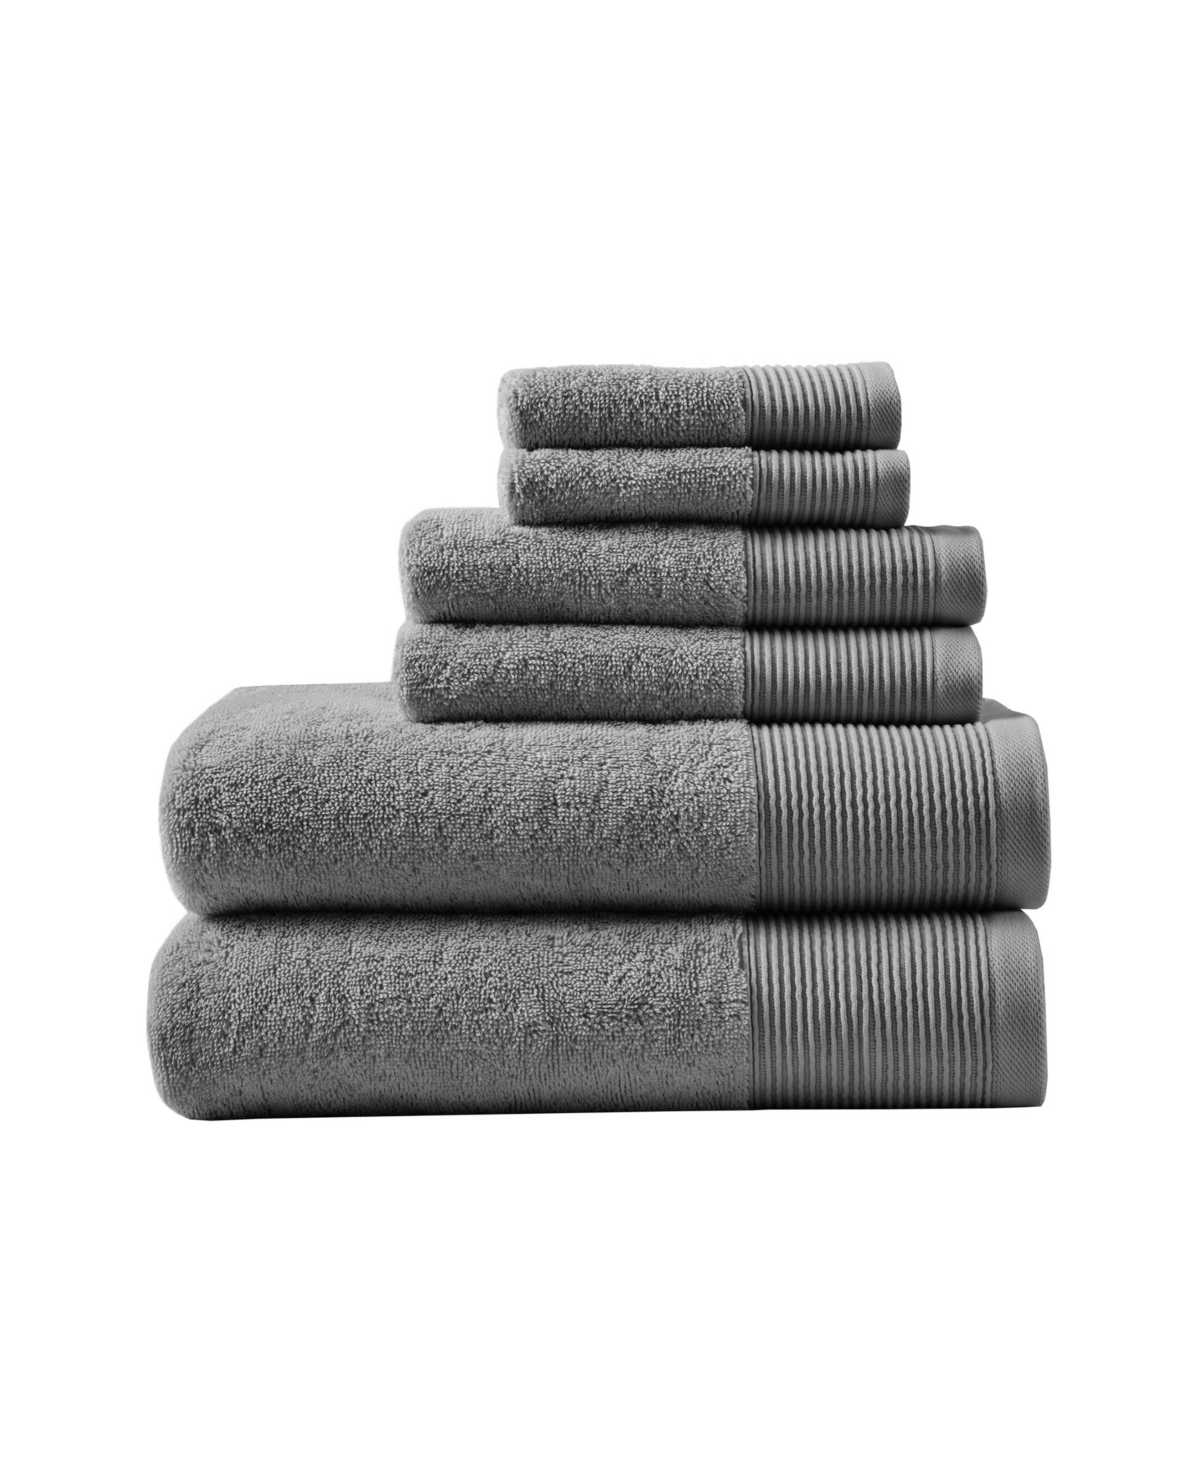 Beautyrest Nuage Cotton Tencel Blend Antimicrobial 6 Piece Towel Set Bedding In Charcoal